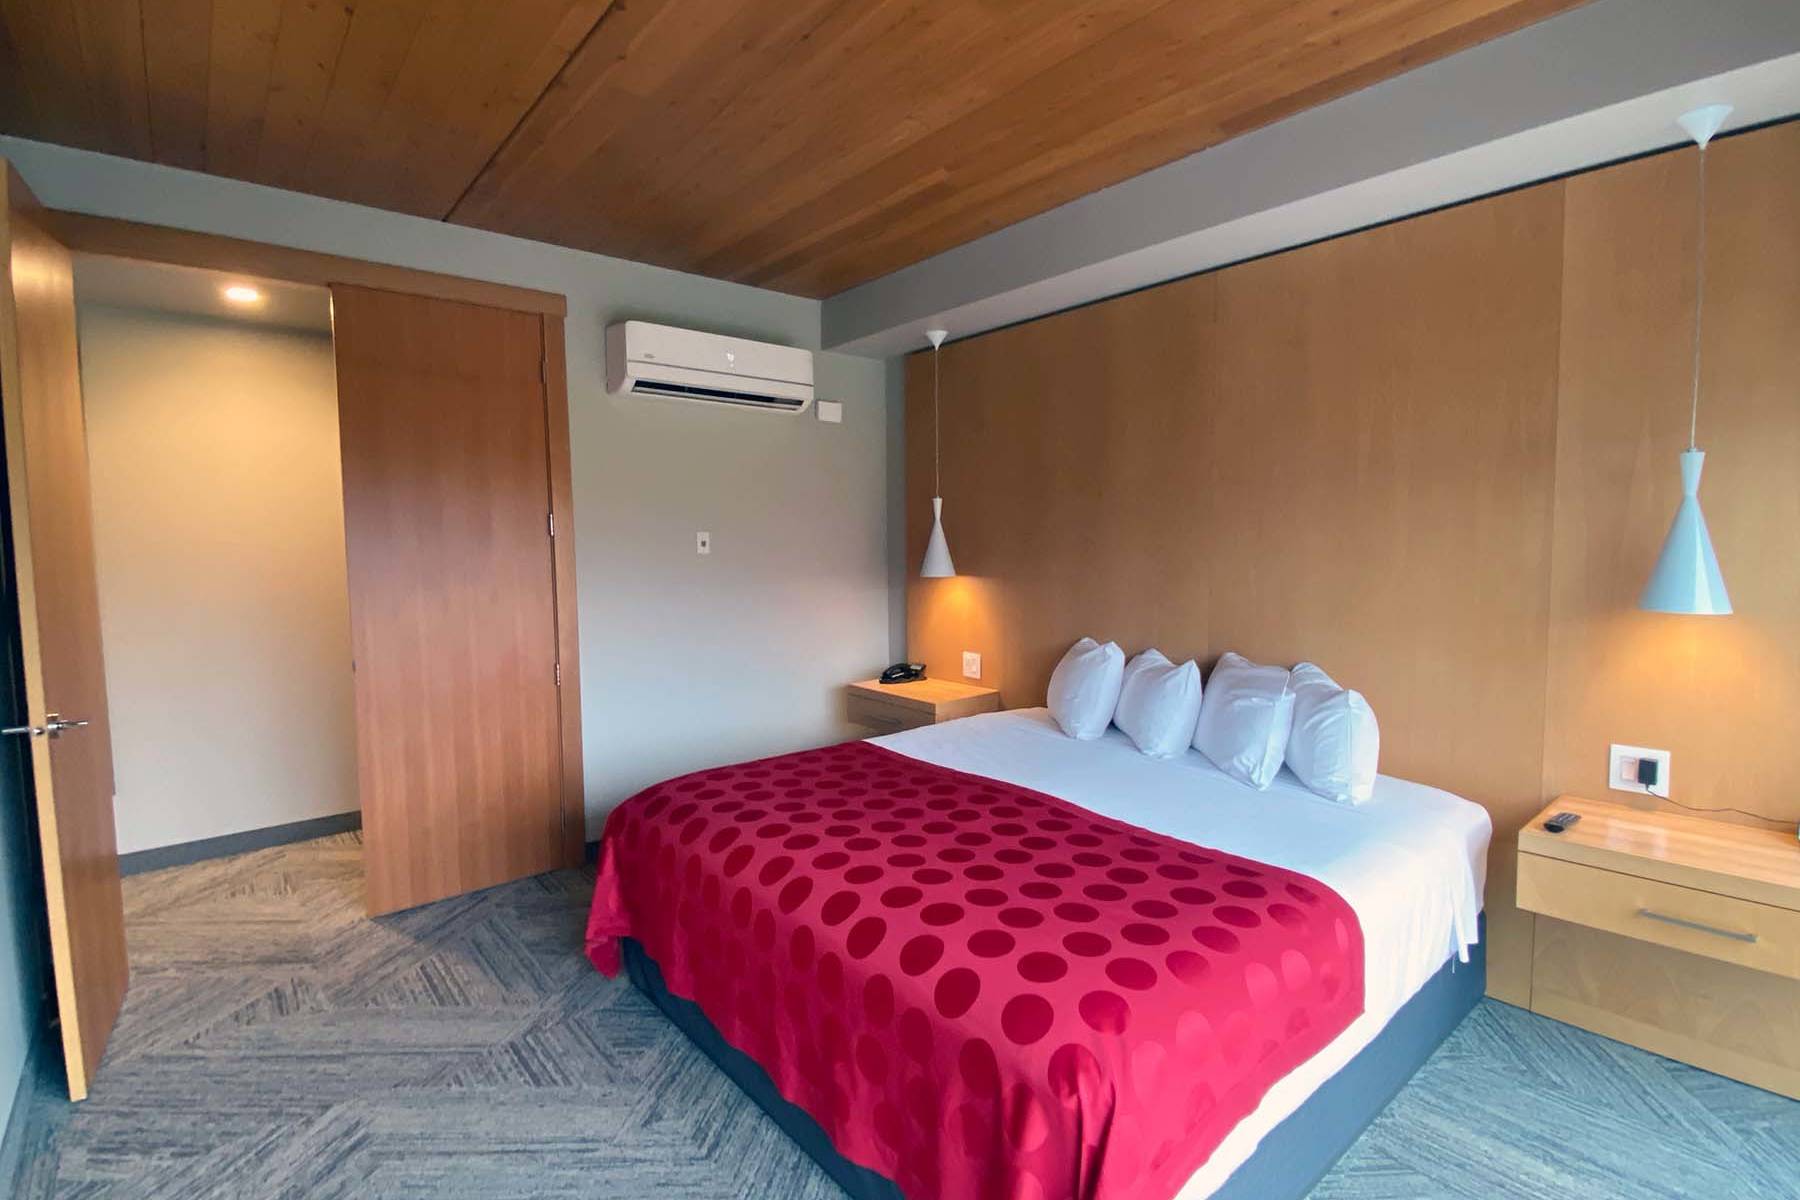 Lower Lakeview Suites - Bedroom